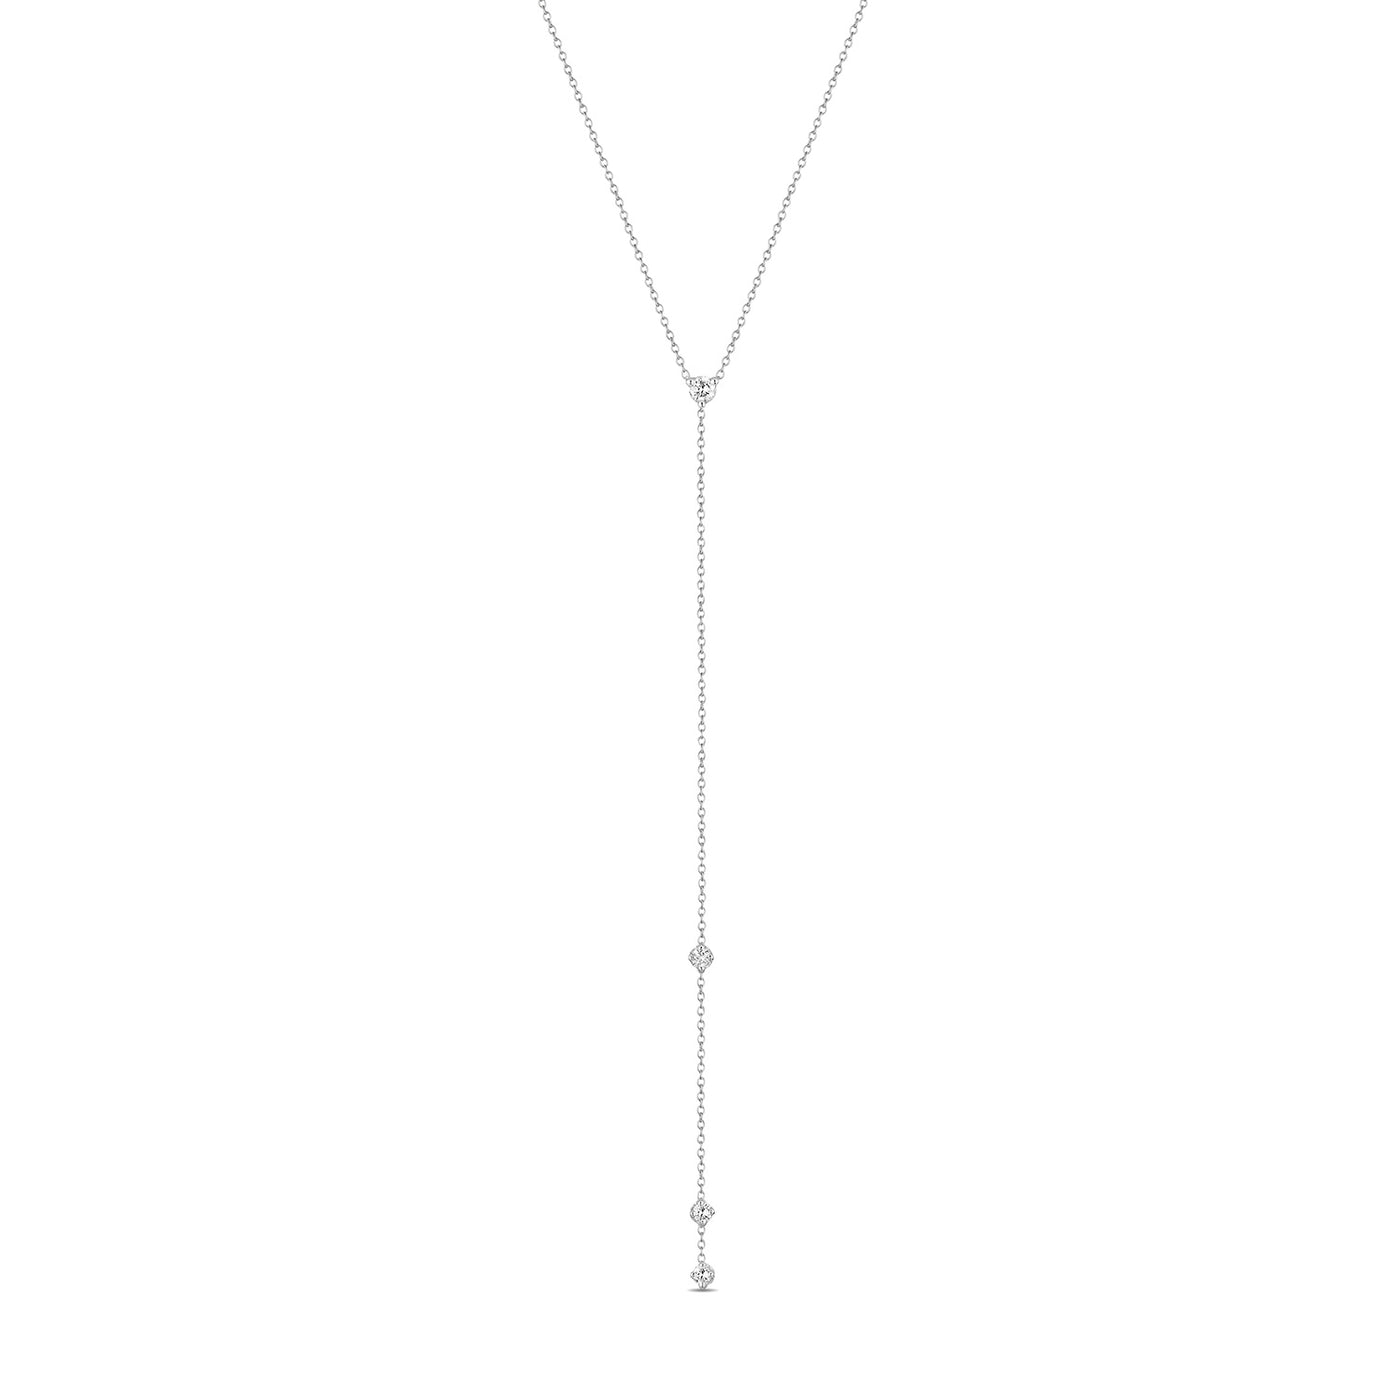 FOPE 18CT White Gold Lariat Necklet with Diamond Pavè – Keanes Jewellers